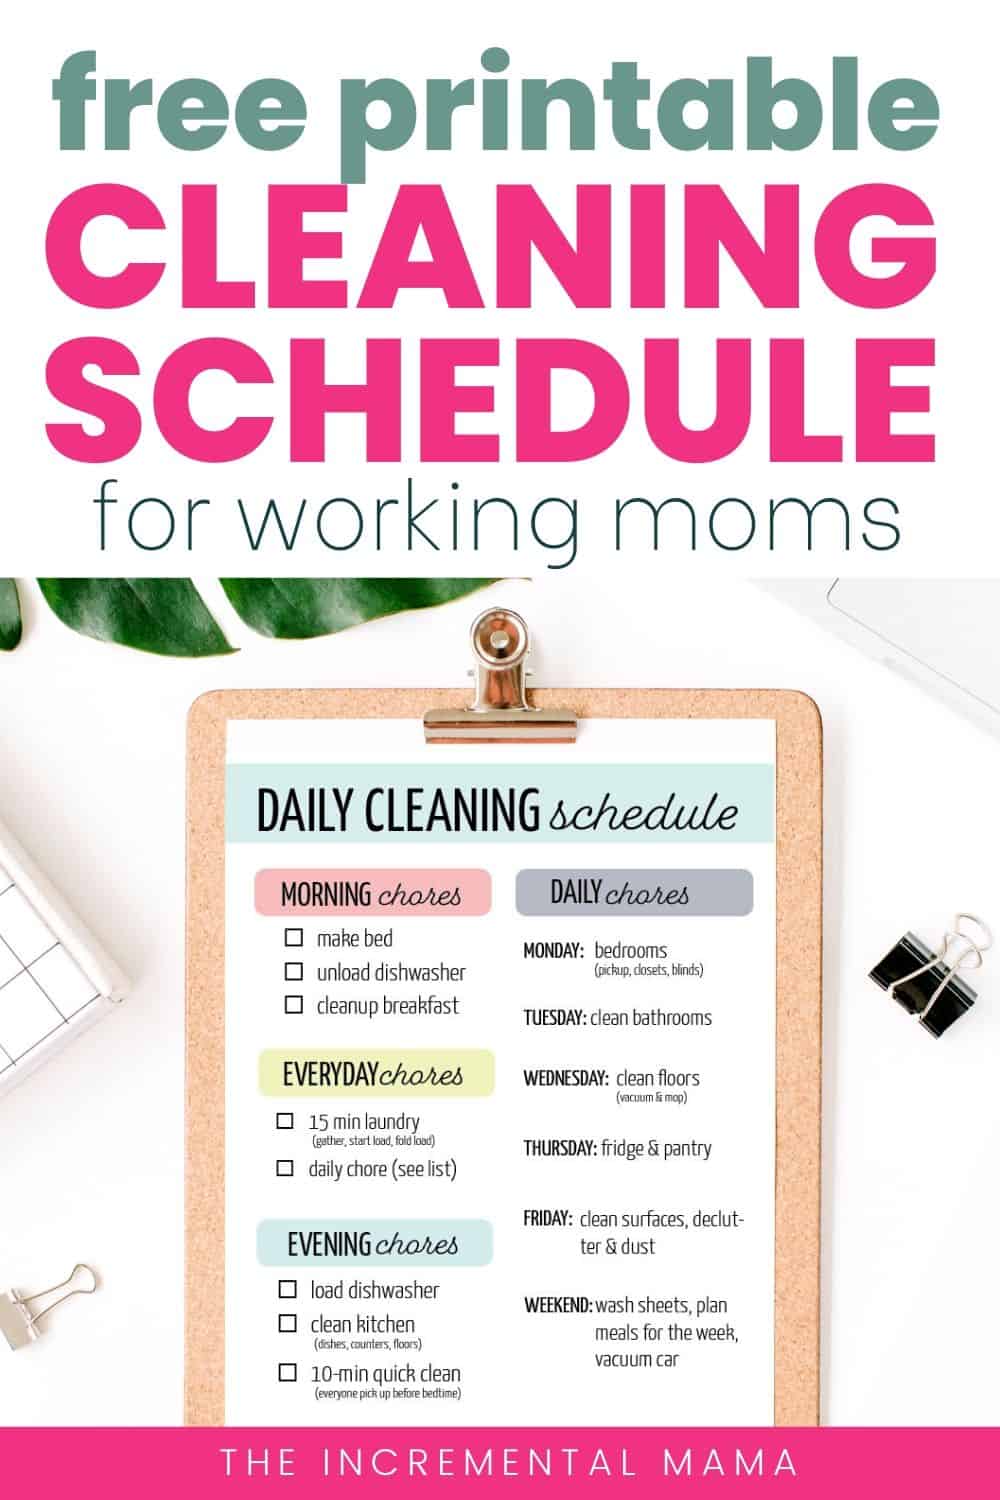 easy-printable-cleaning-schedule-for-working-moms